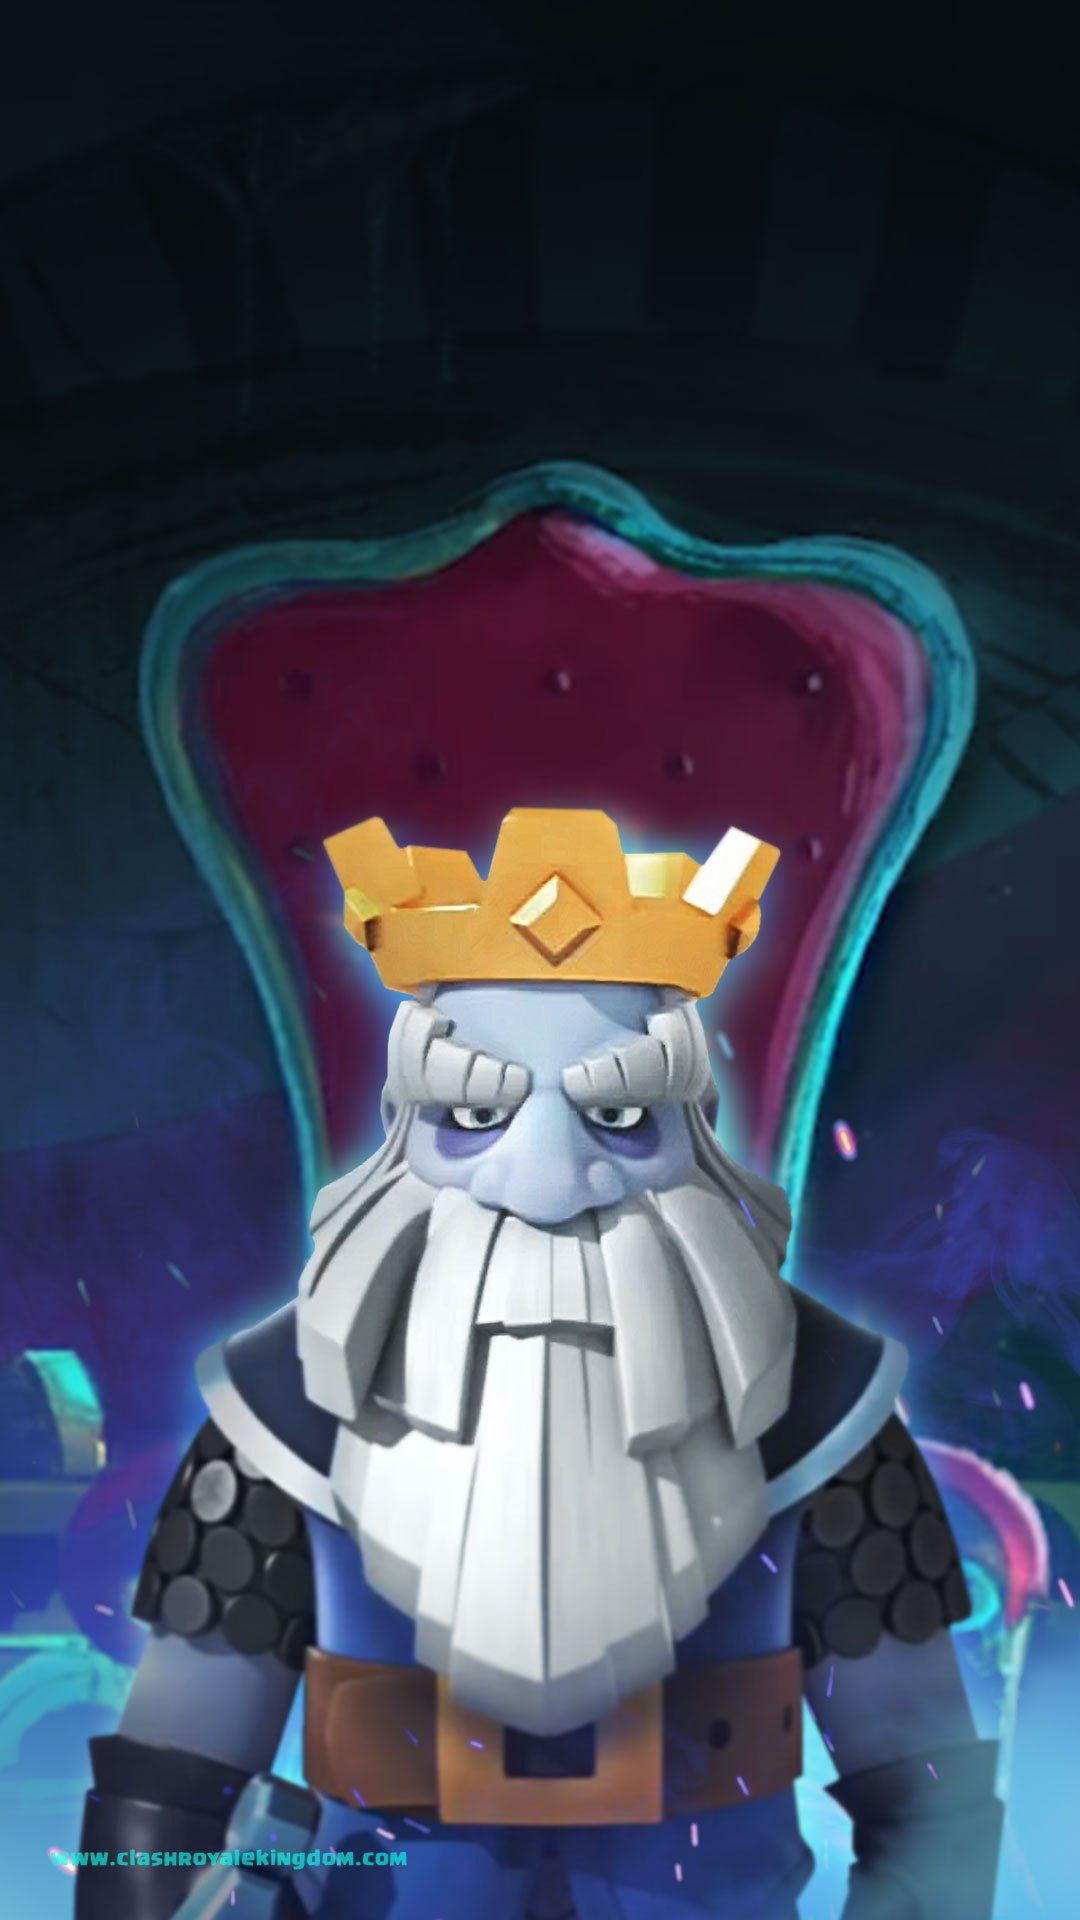 Clash Royale Wallpaper Iphone - Clash Royale Royal Ghost (# 369729